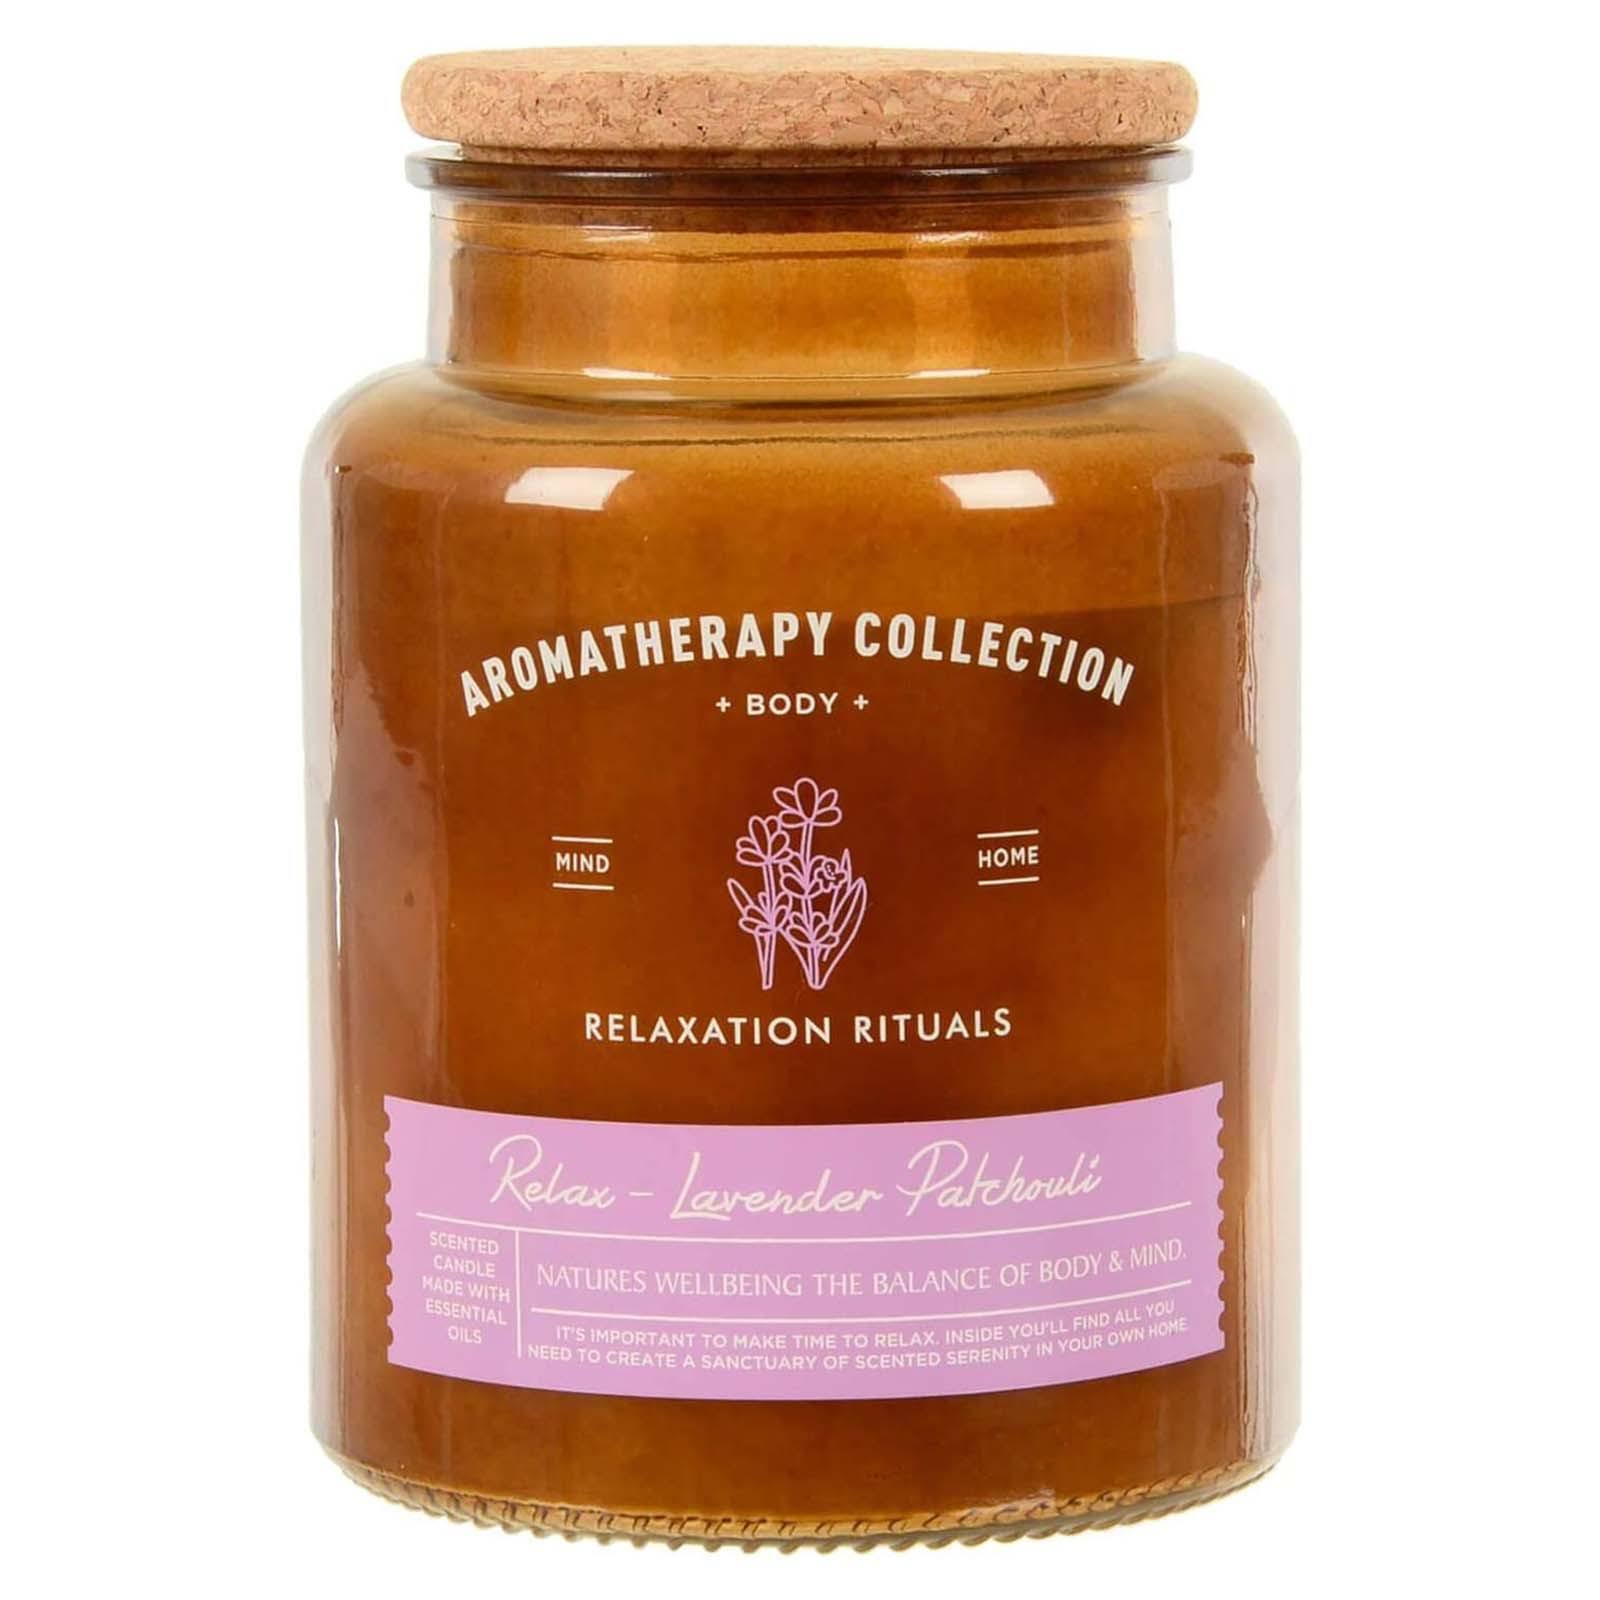 Baltus Aromatherapy Collection Lavender and Patchouli Candle